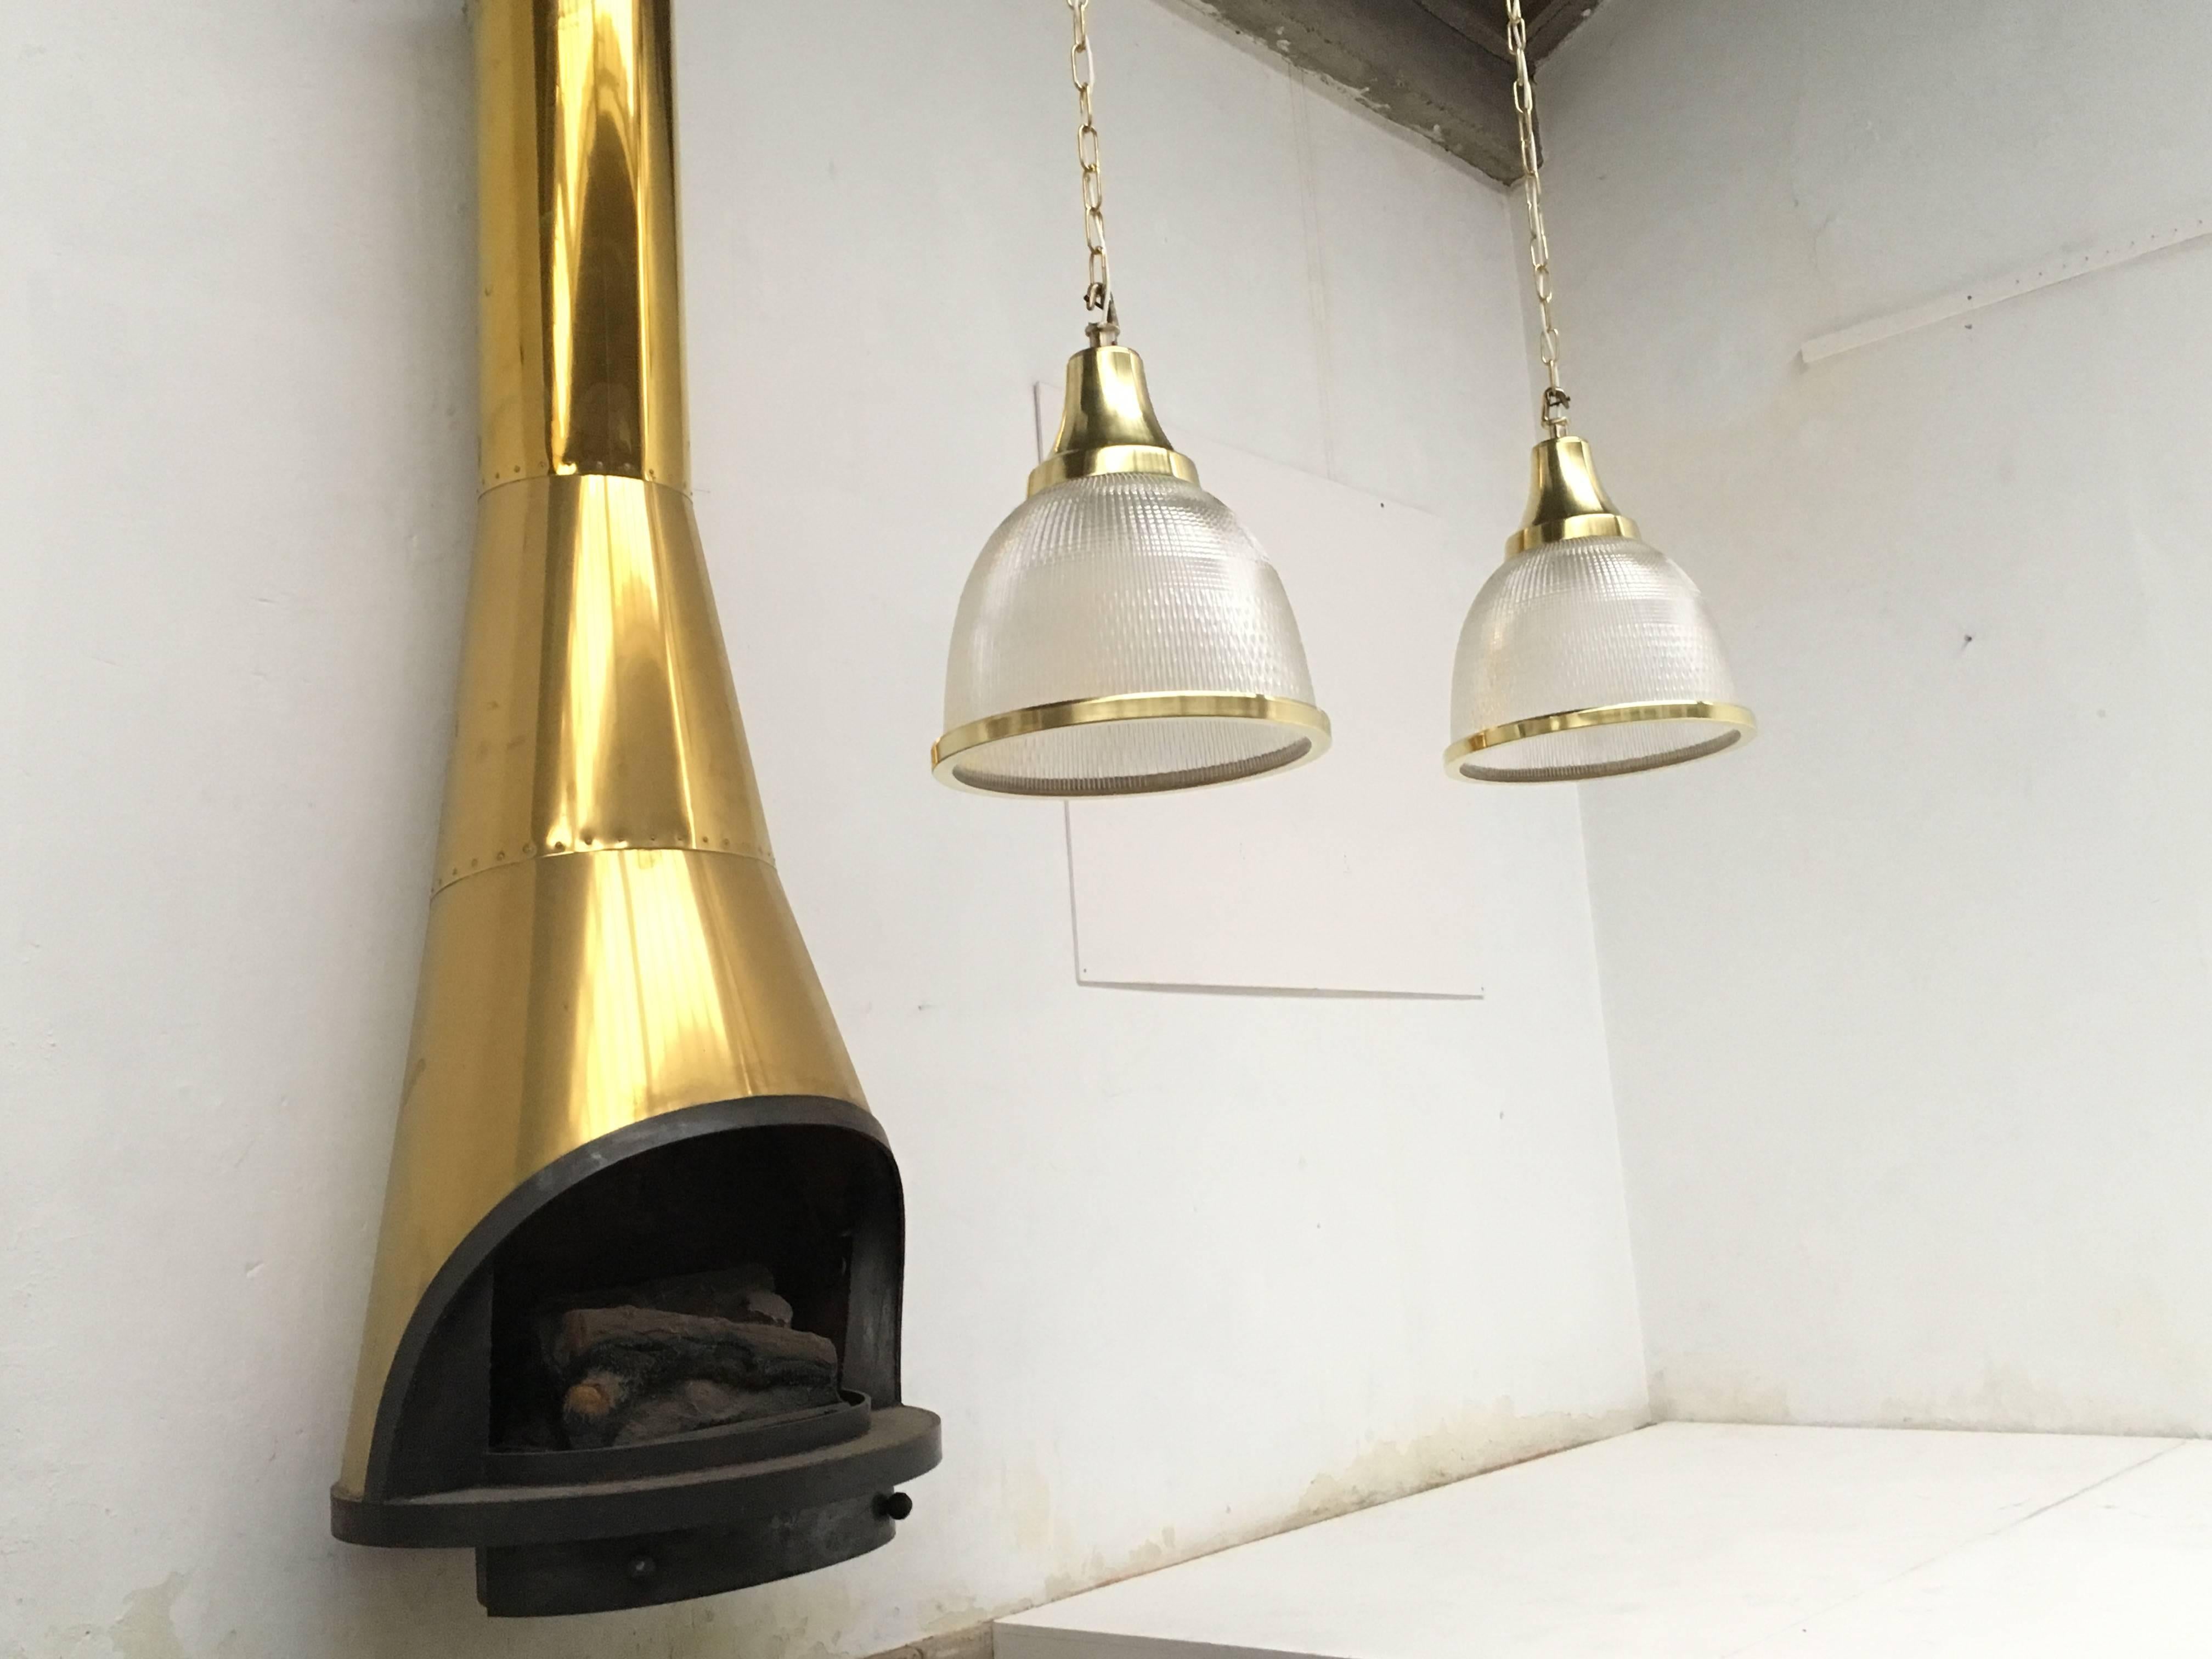 Pair of impressive Holophane glass and brass pendants from a Belgian church.

We polished the brass and rewired this pair completely and have another four pieces extra in stock (not yet polished and rewired).

Price listed is for two